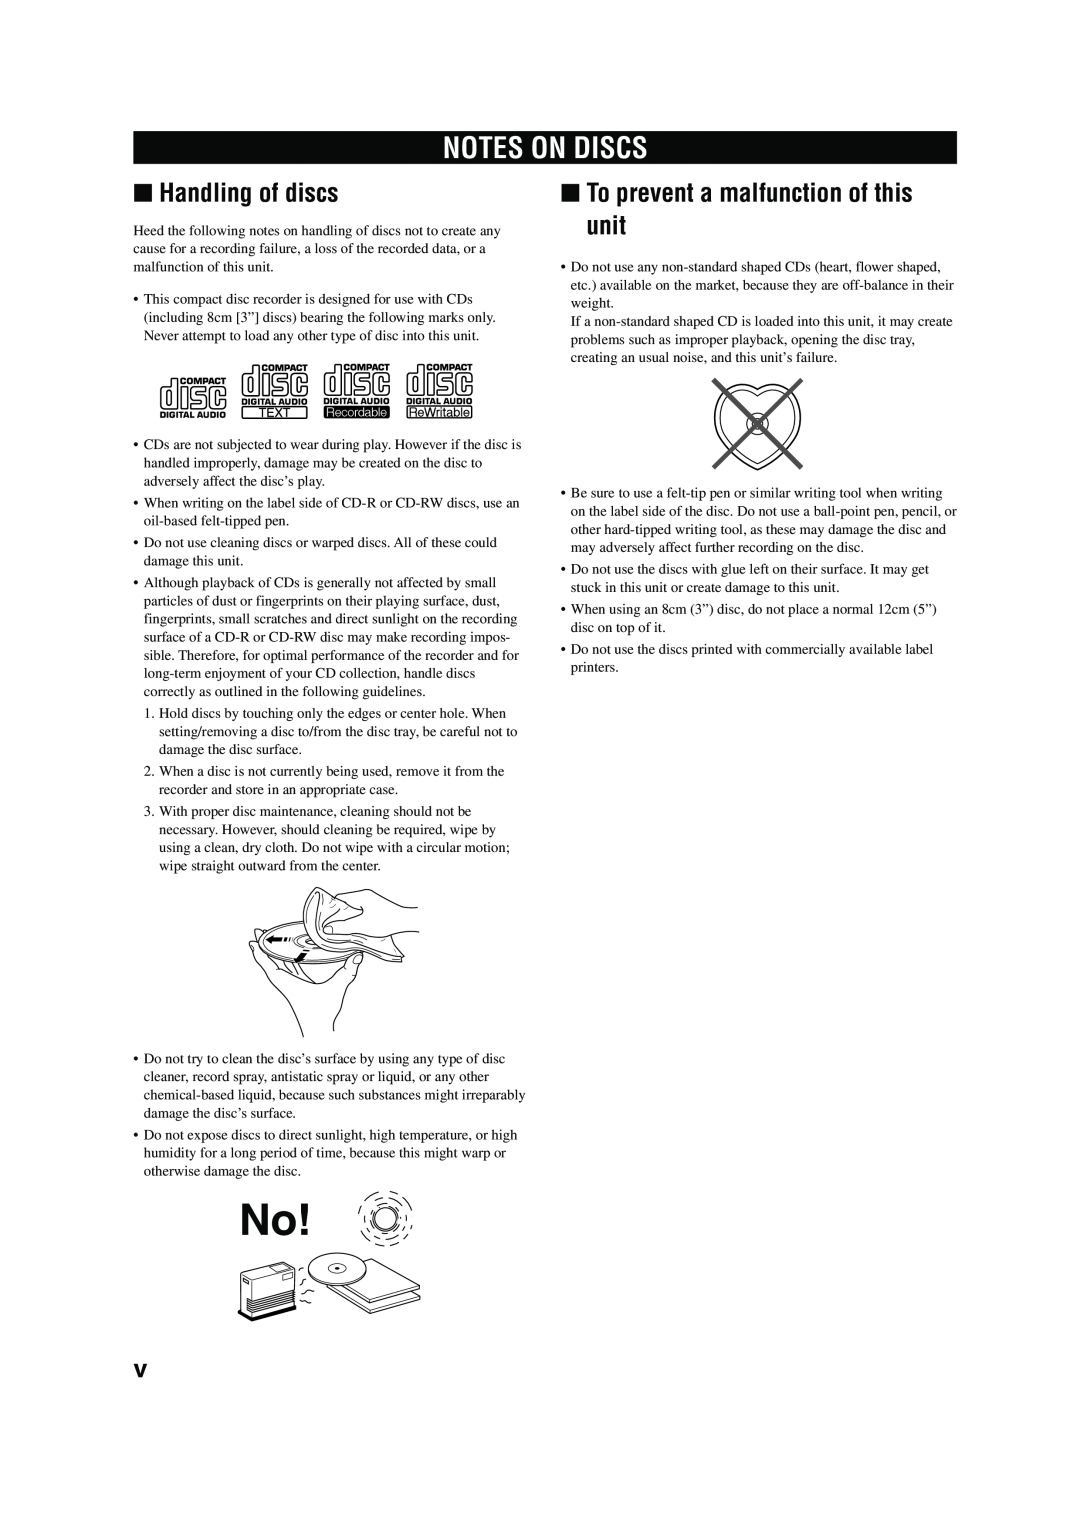 Yamaha CDR-HD 1500 owner manual Notes On Discs, Handling of discs, To prevent a malfunction of this unit 